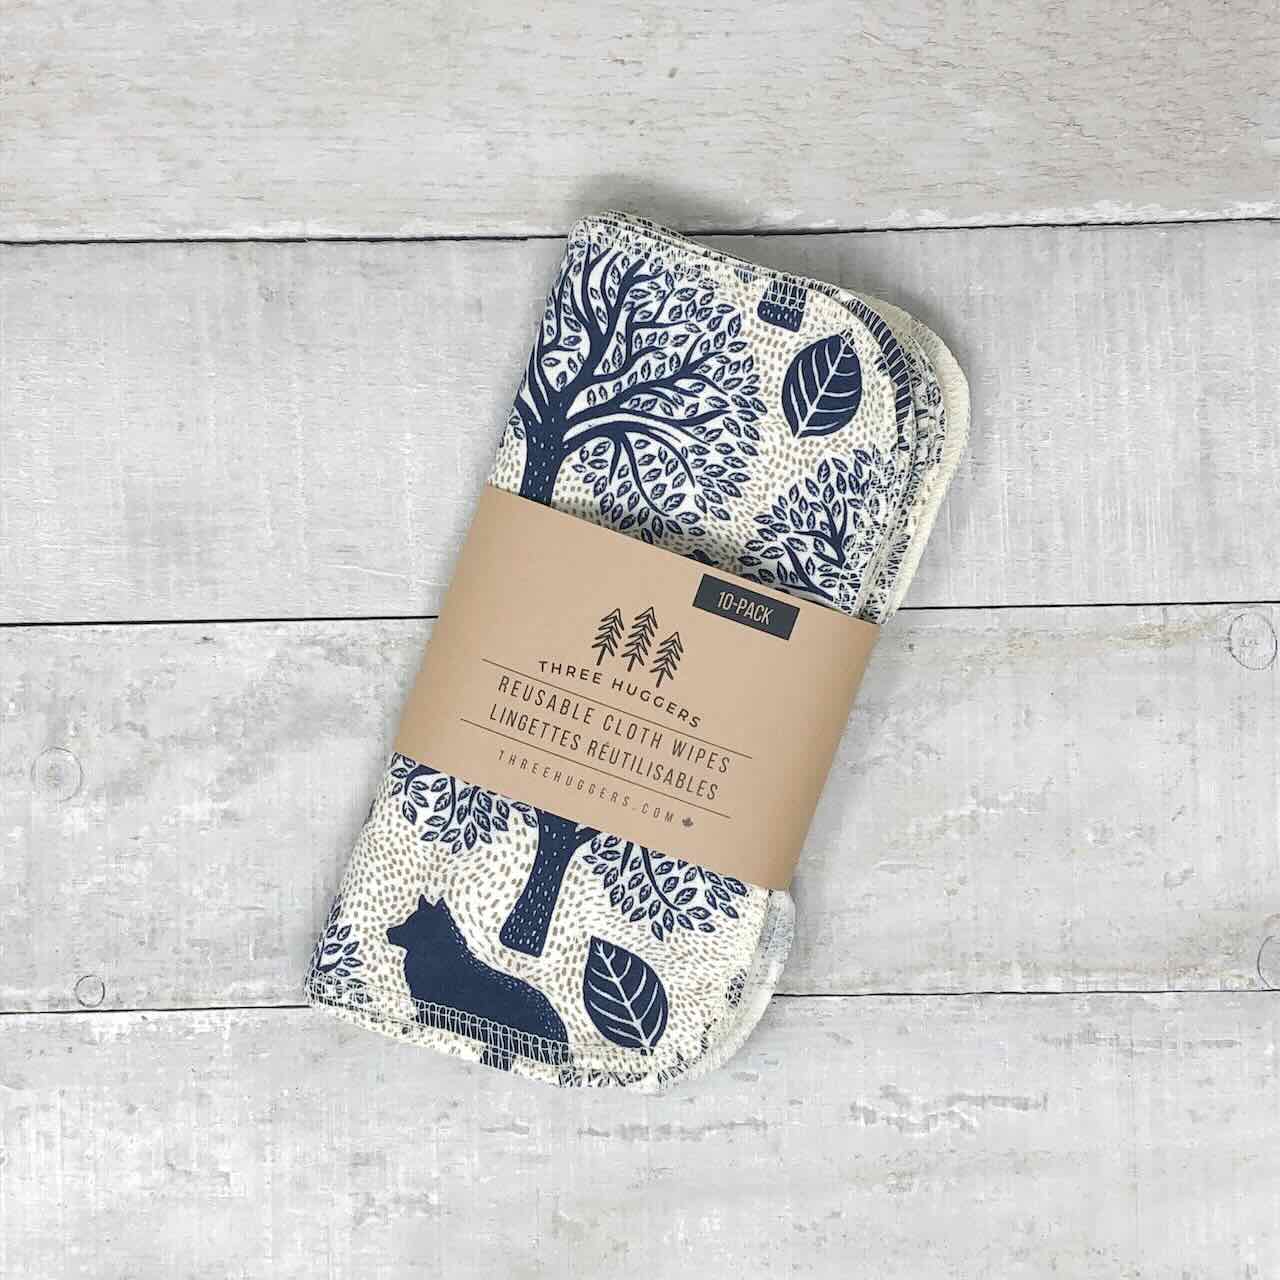 A set of 10 reusable cloth wipes in its paper sleeve, with elegant forest animals printed on the fabric.